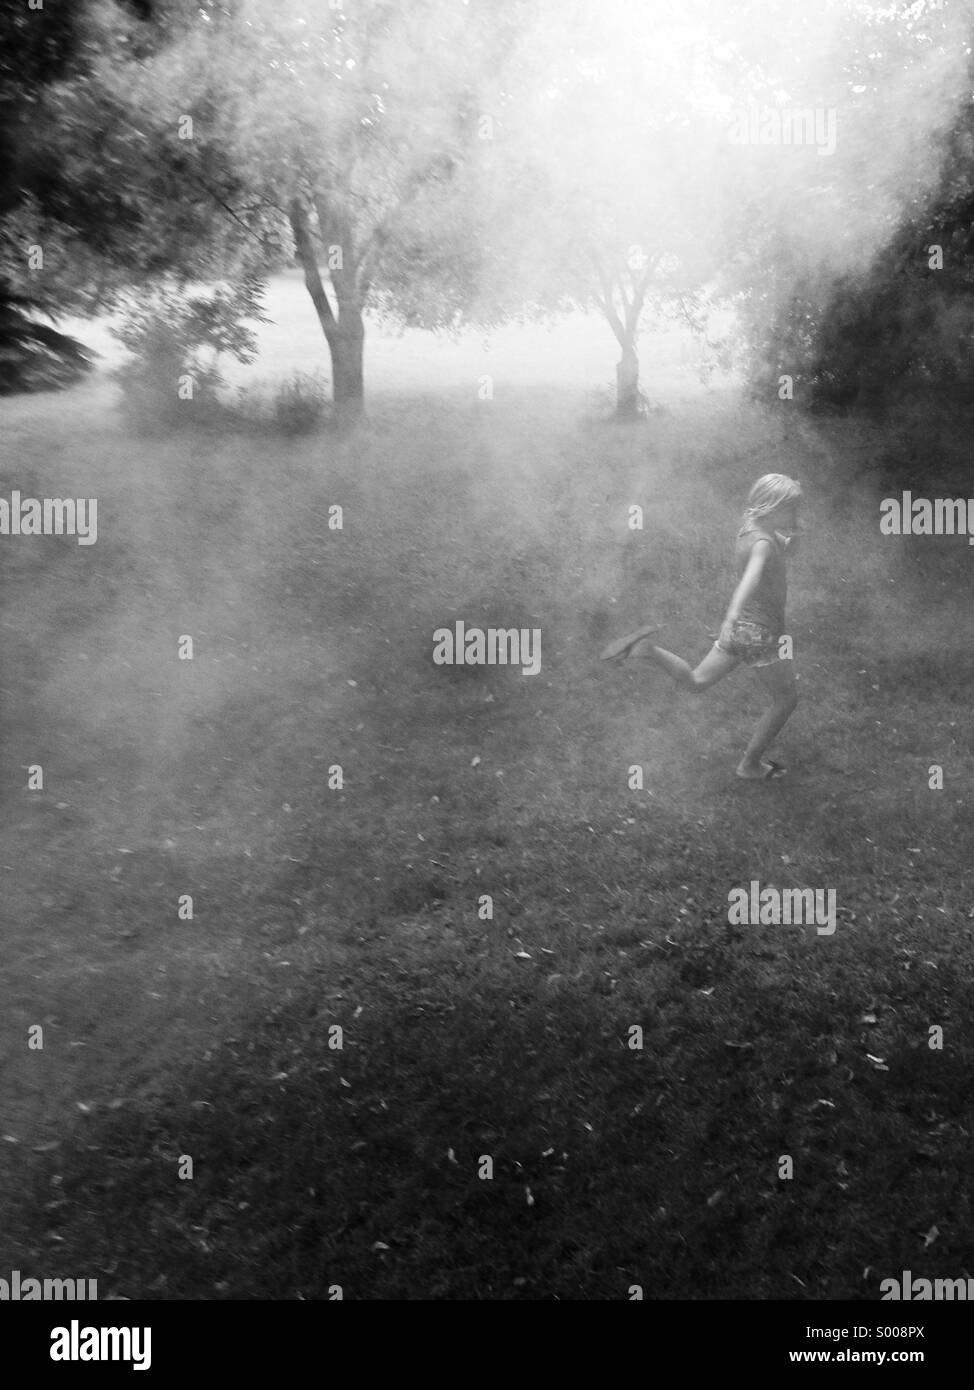 The drifting smoke from fireworks casts a shroud over a girl running through a park. Stock Photo